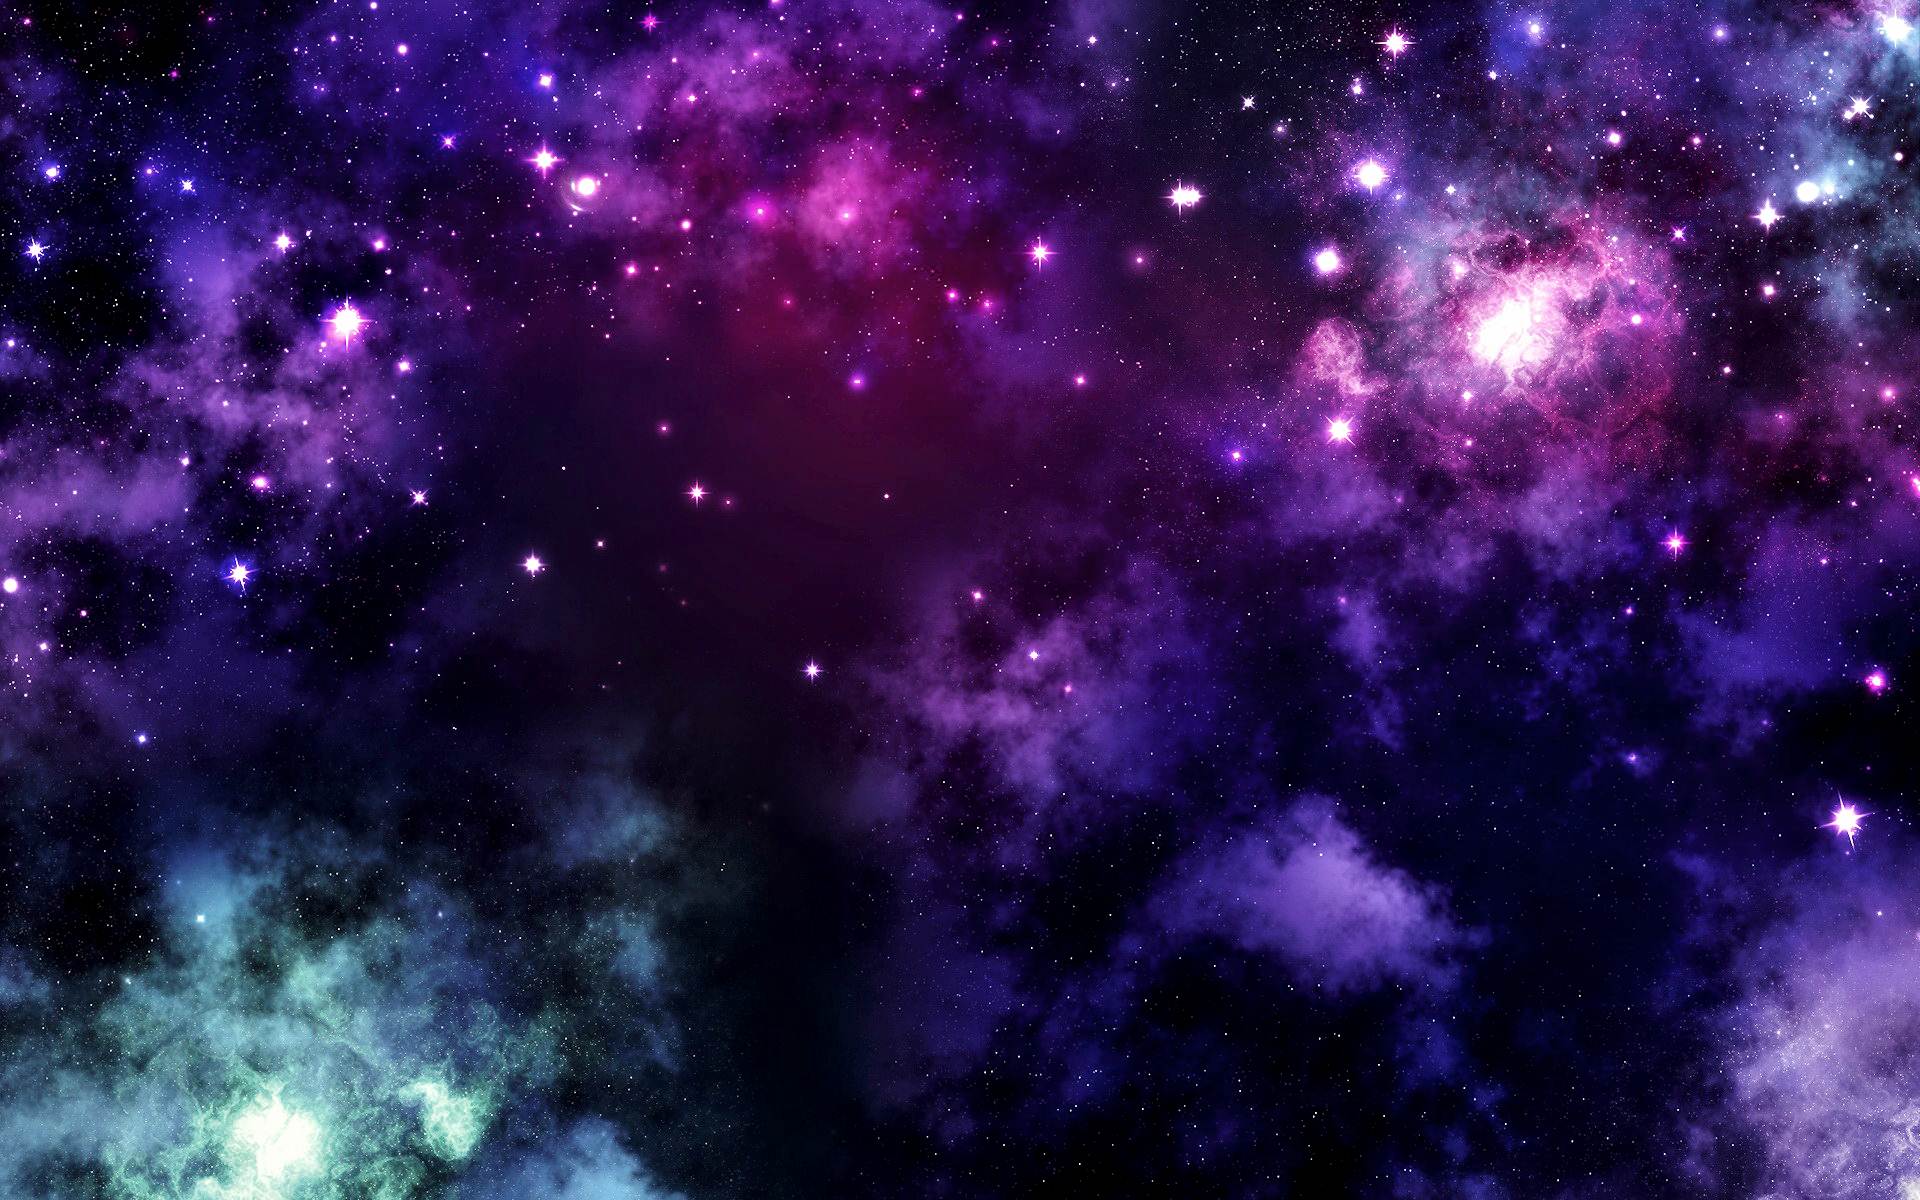 Galaxy HD Wallpaper Image Pictures